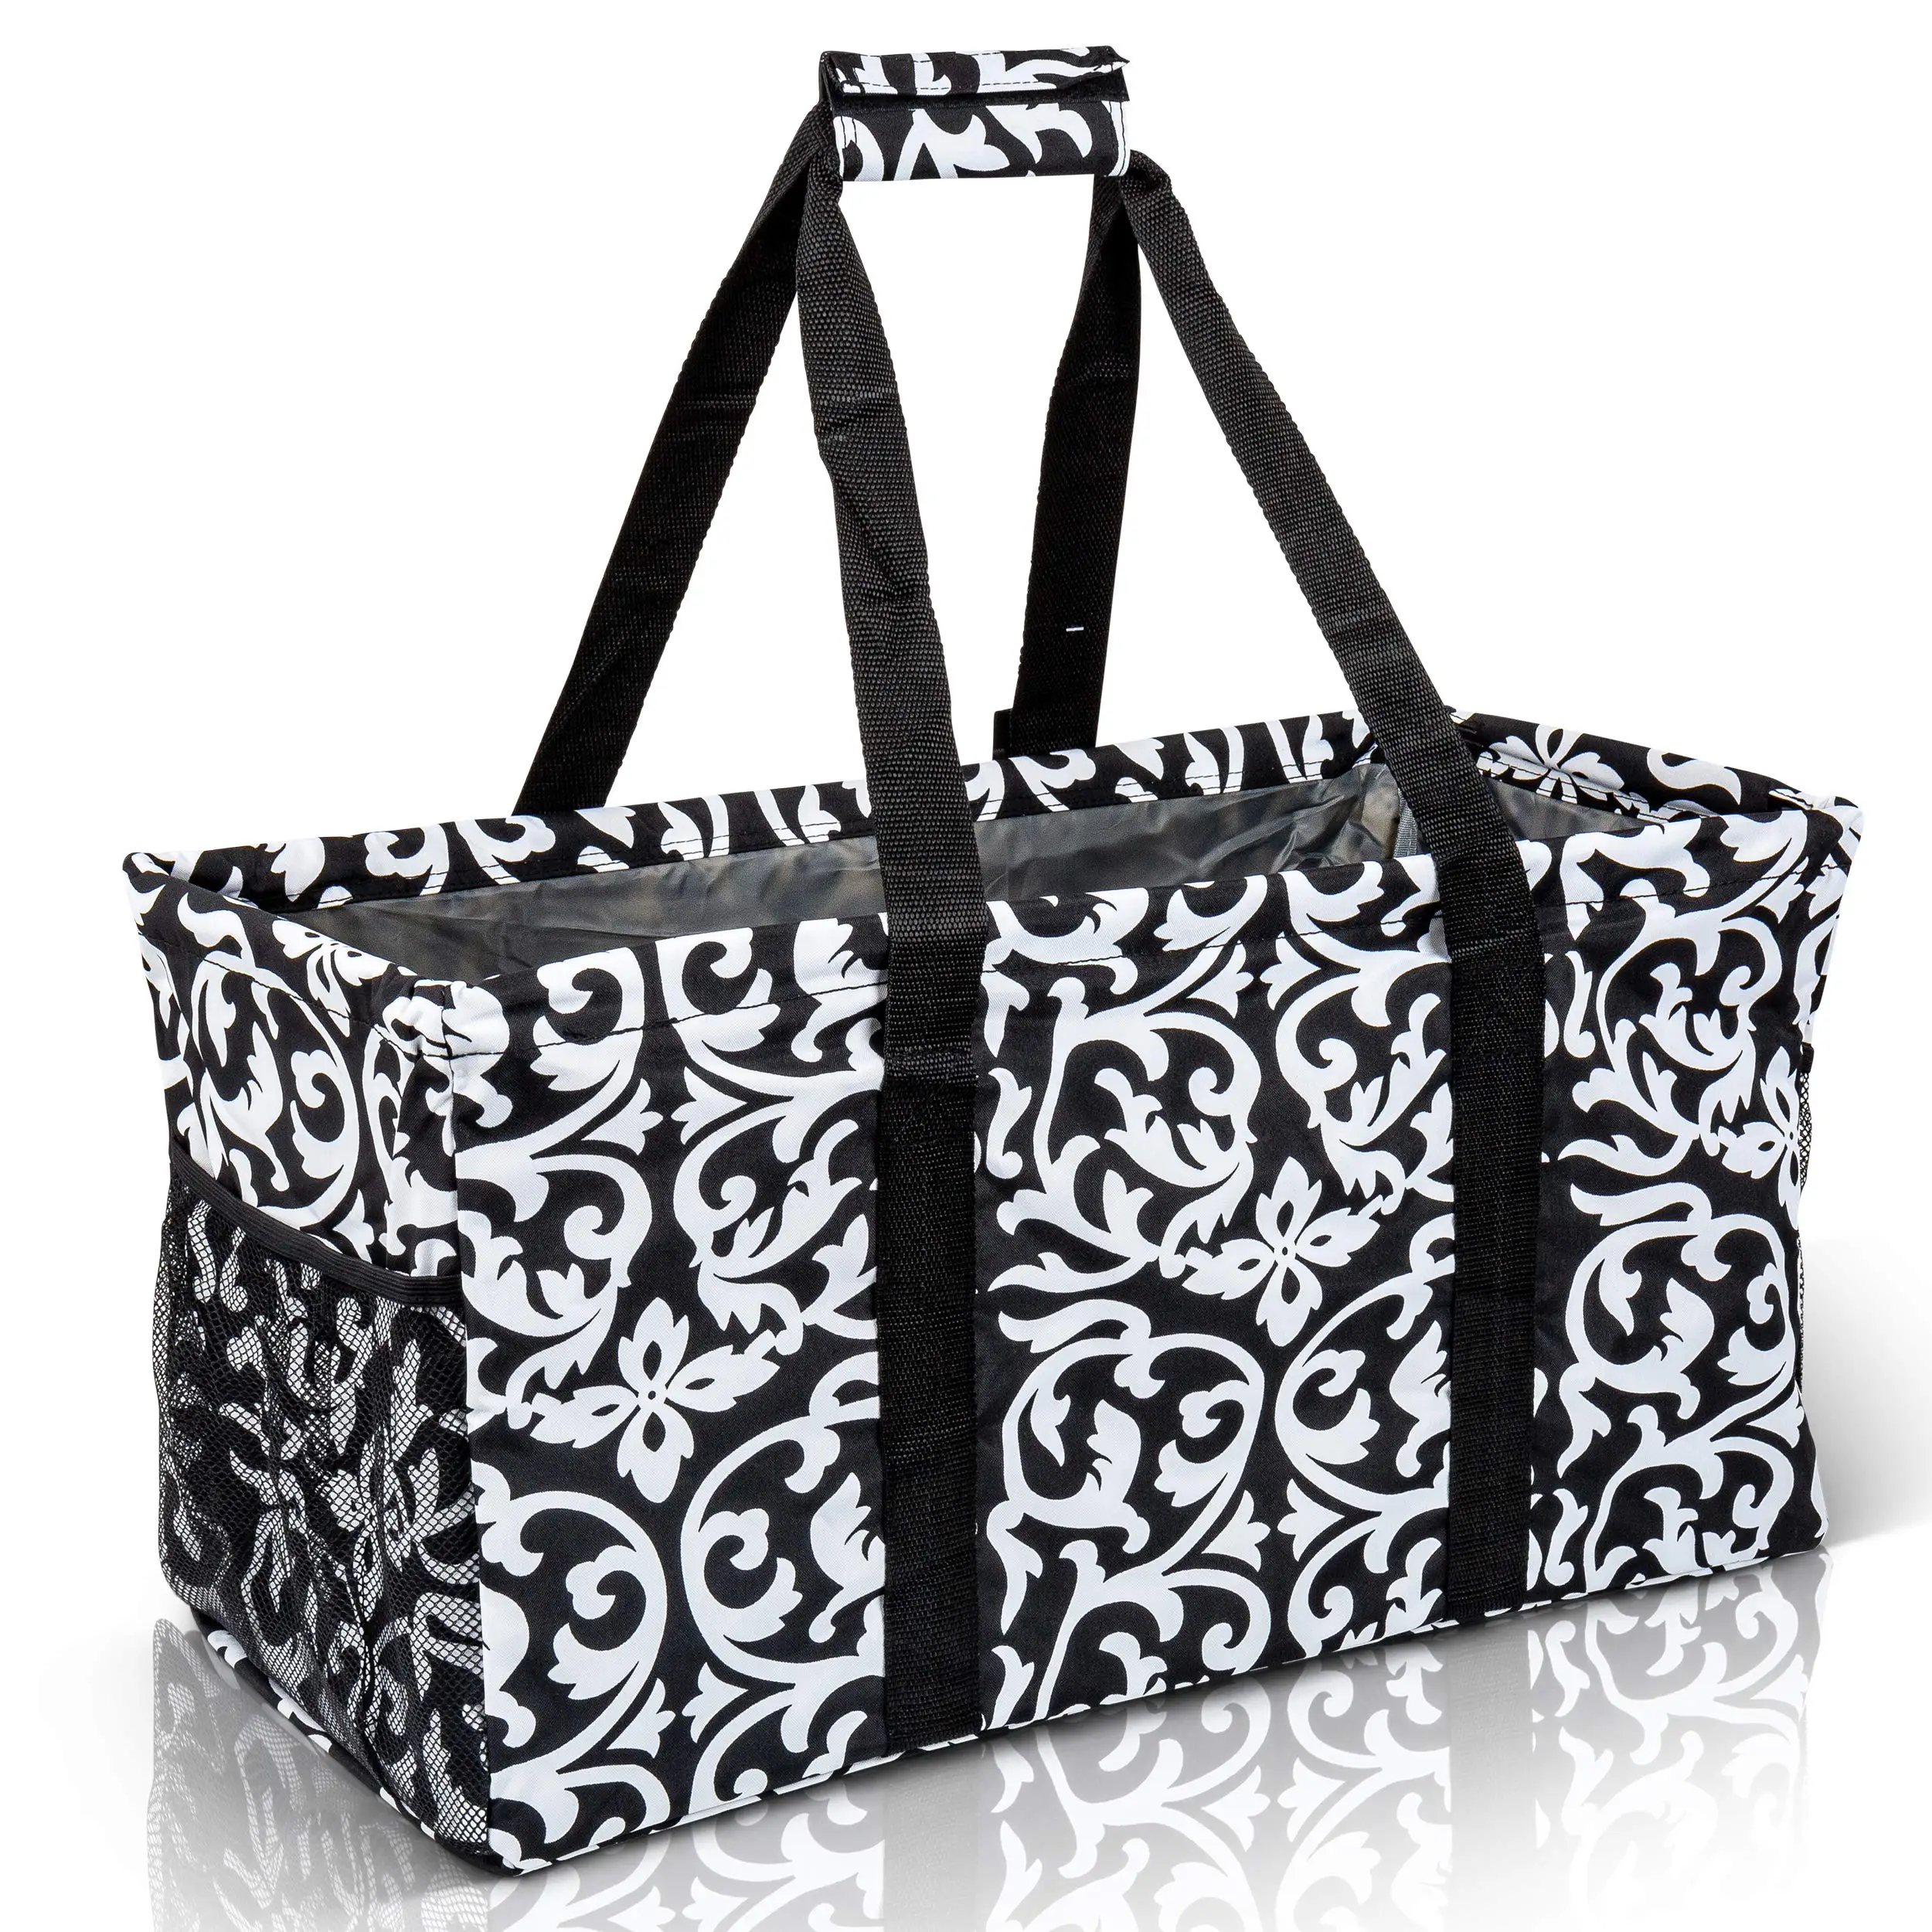 Extra Large Utility Tote Bag - Oversized Collapsible Pool Beach Canvas